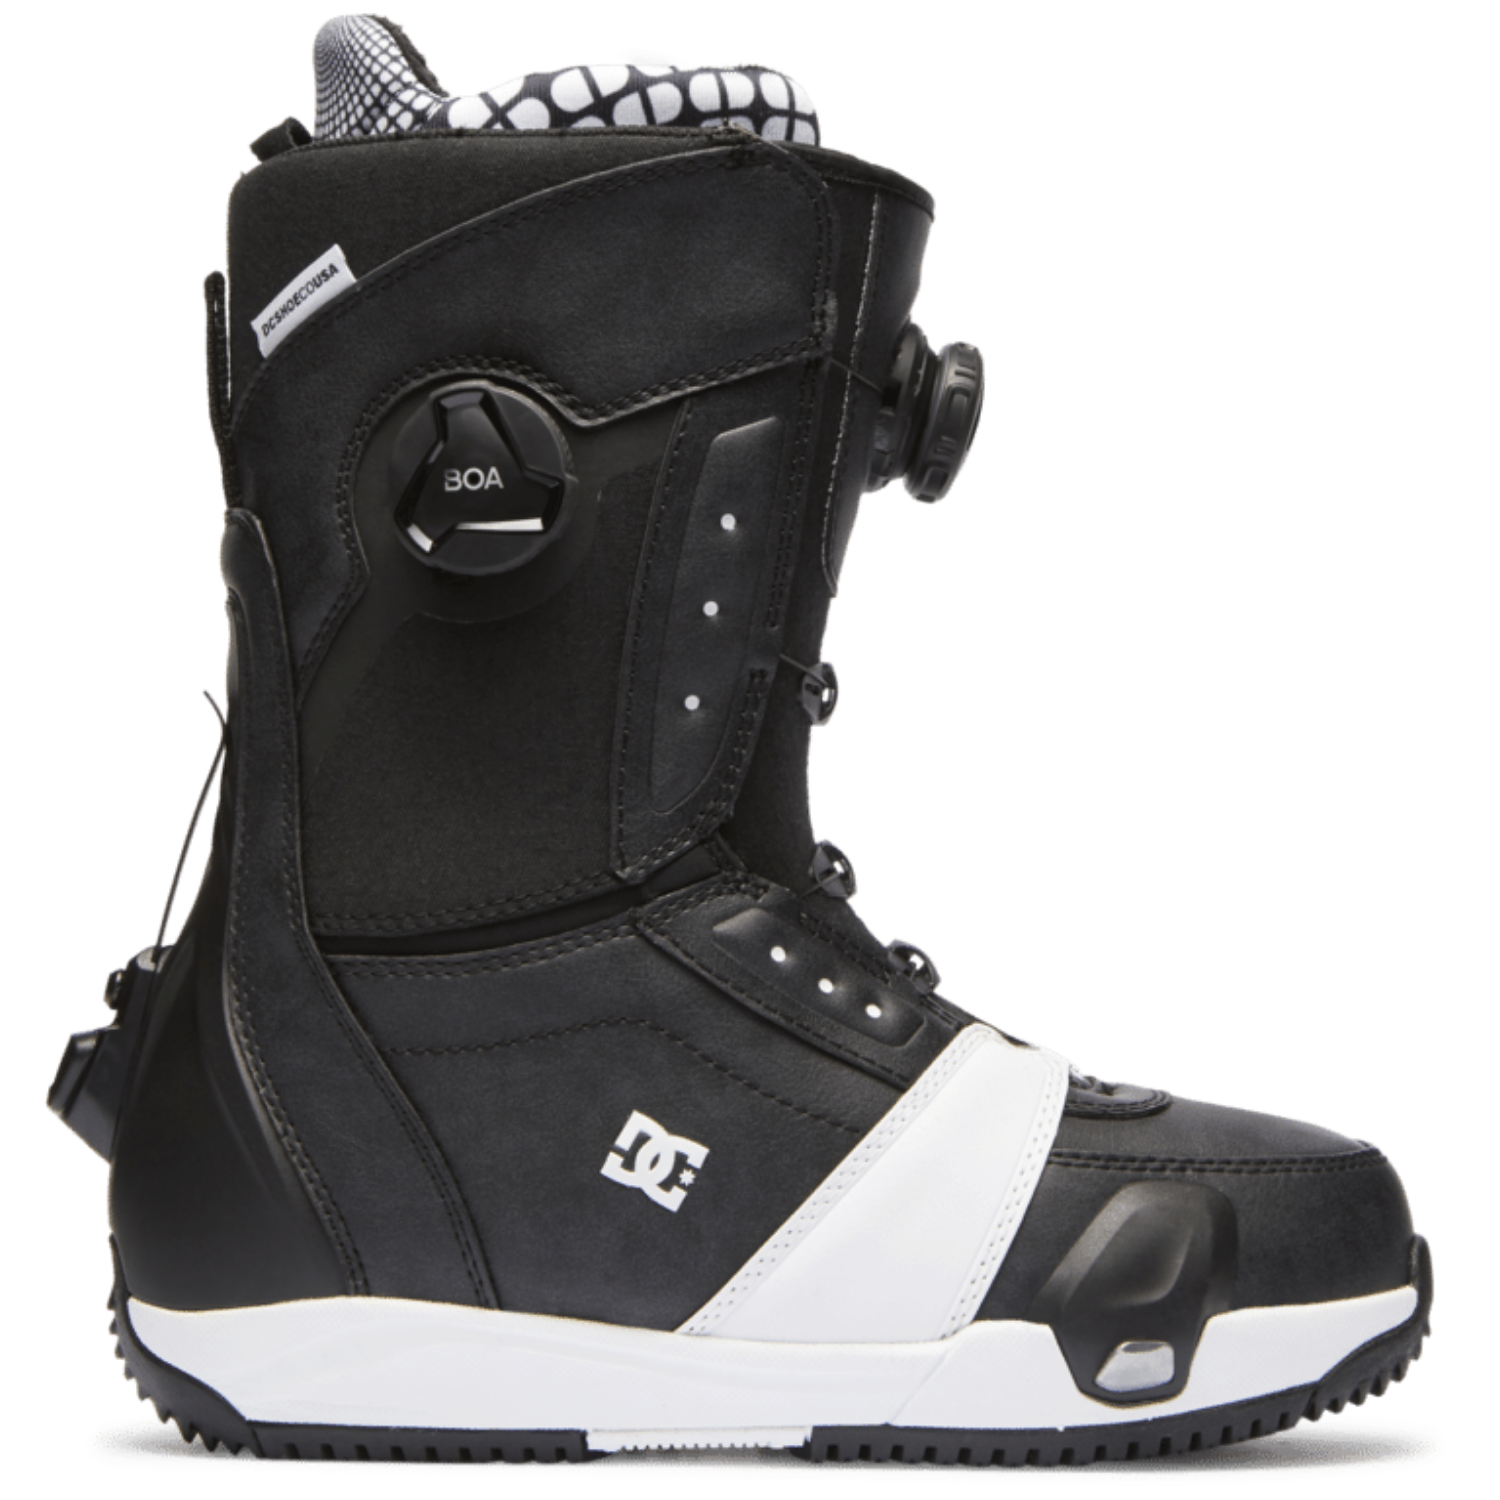 womens snow boots white